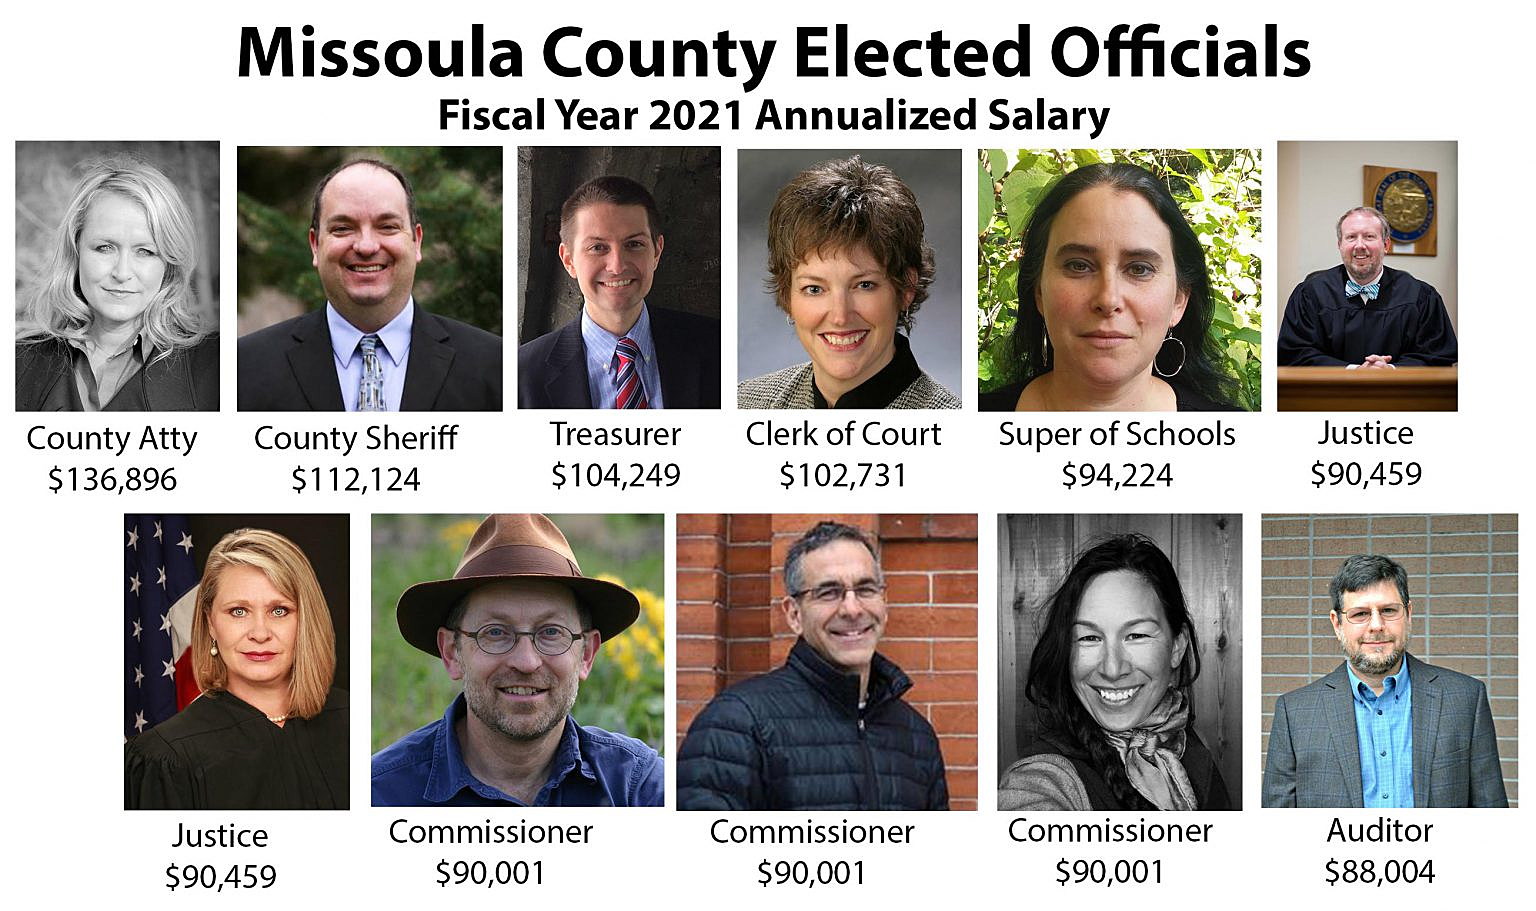 Amid pandemic Missoula County elected officials limit FY21 pay raise